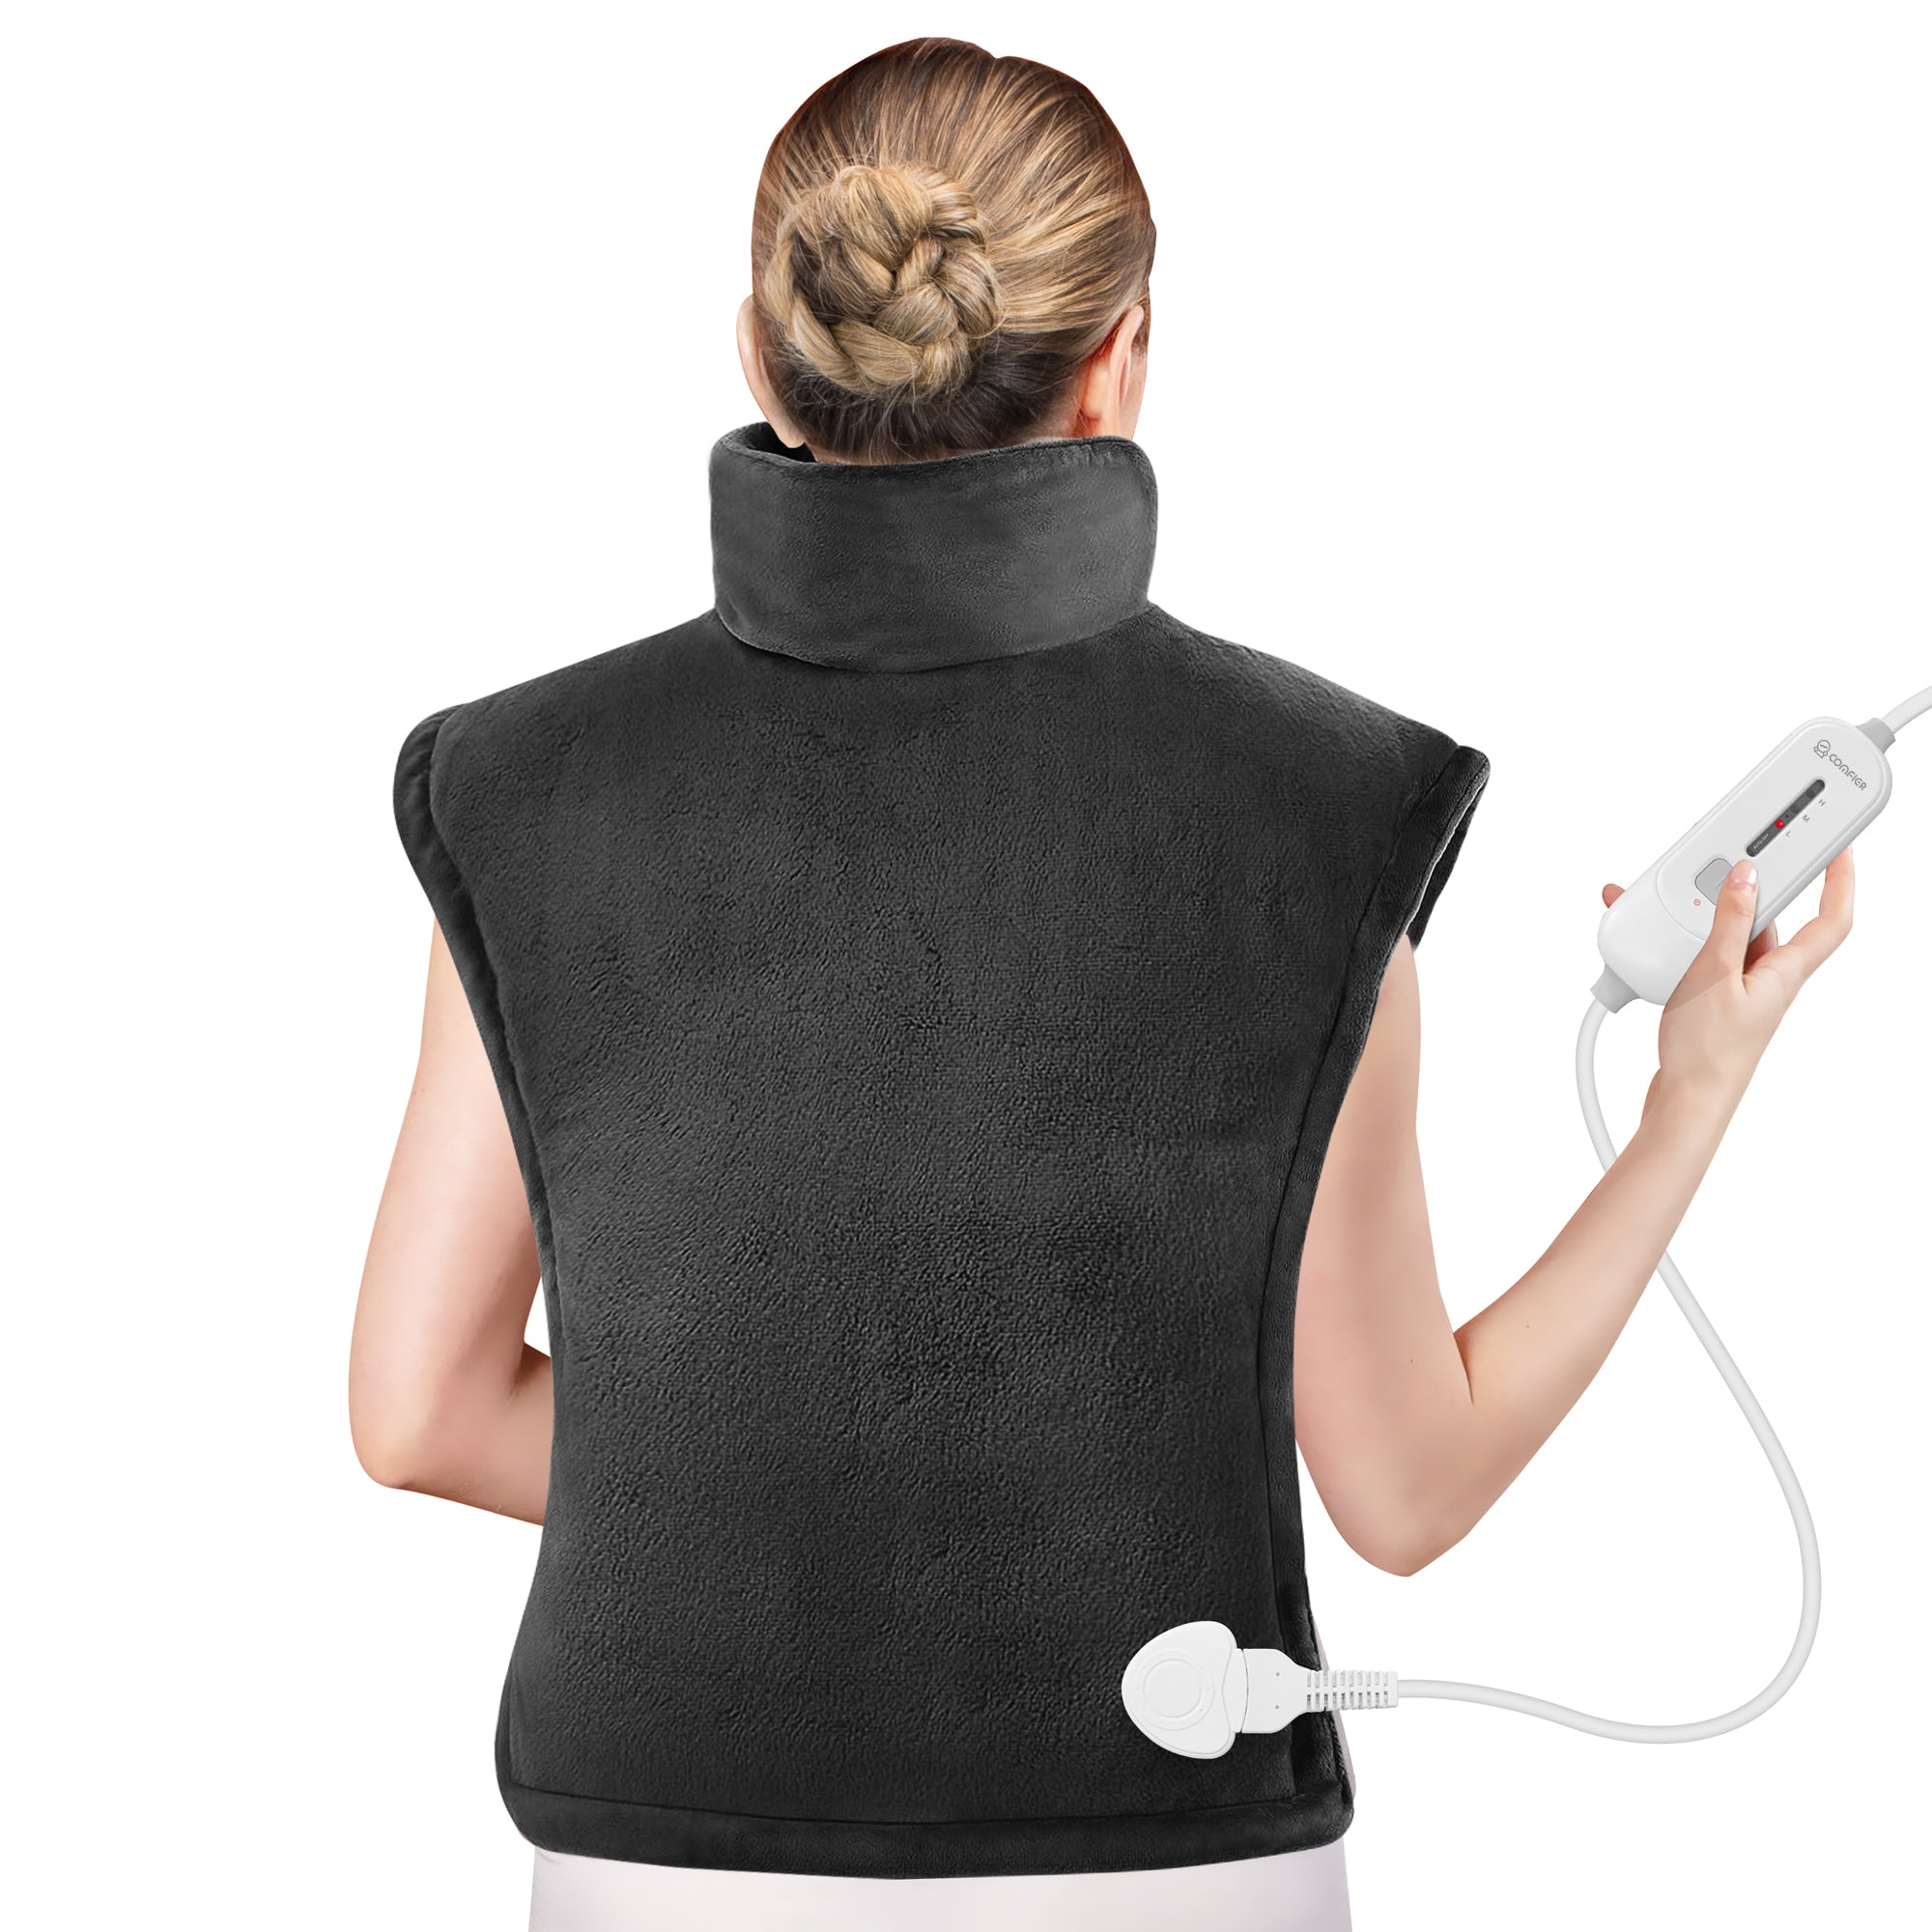 Comfier Electric Large Heating pad for Neck and Shoulders (Black) --H1822D-BLACK